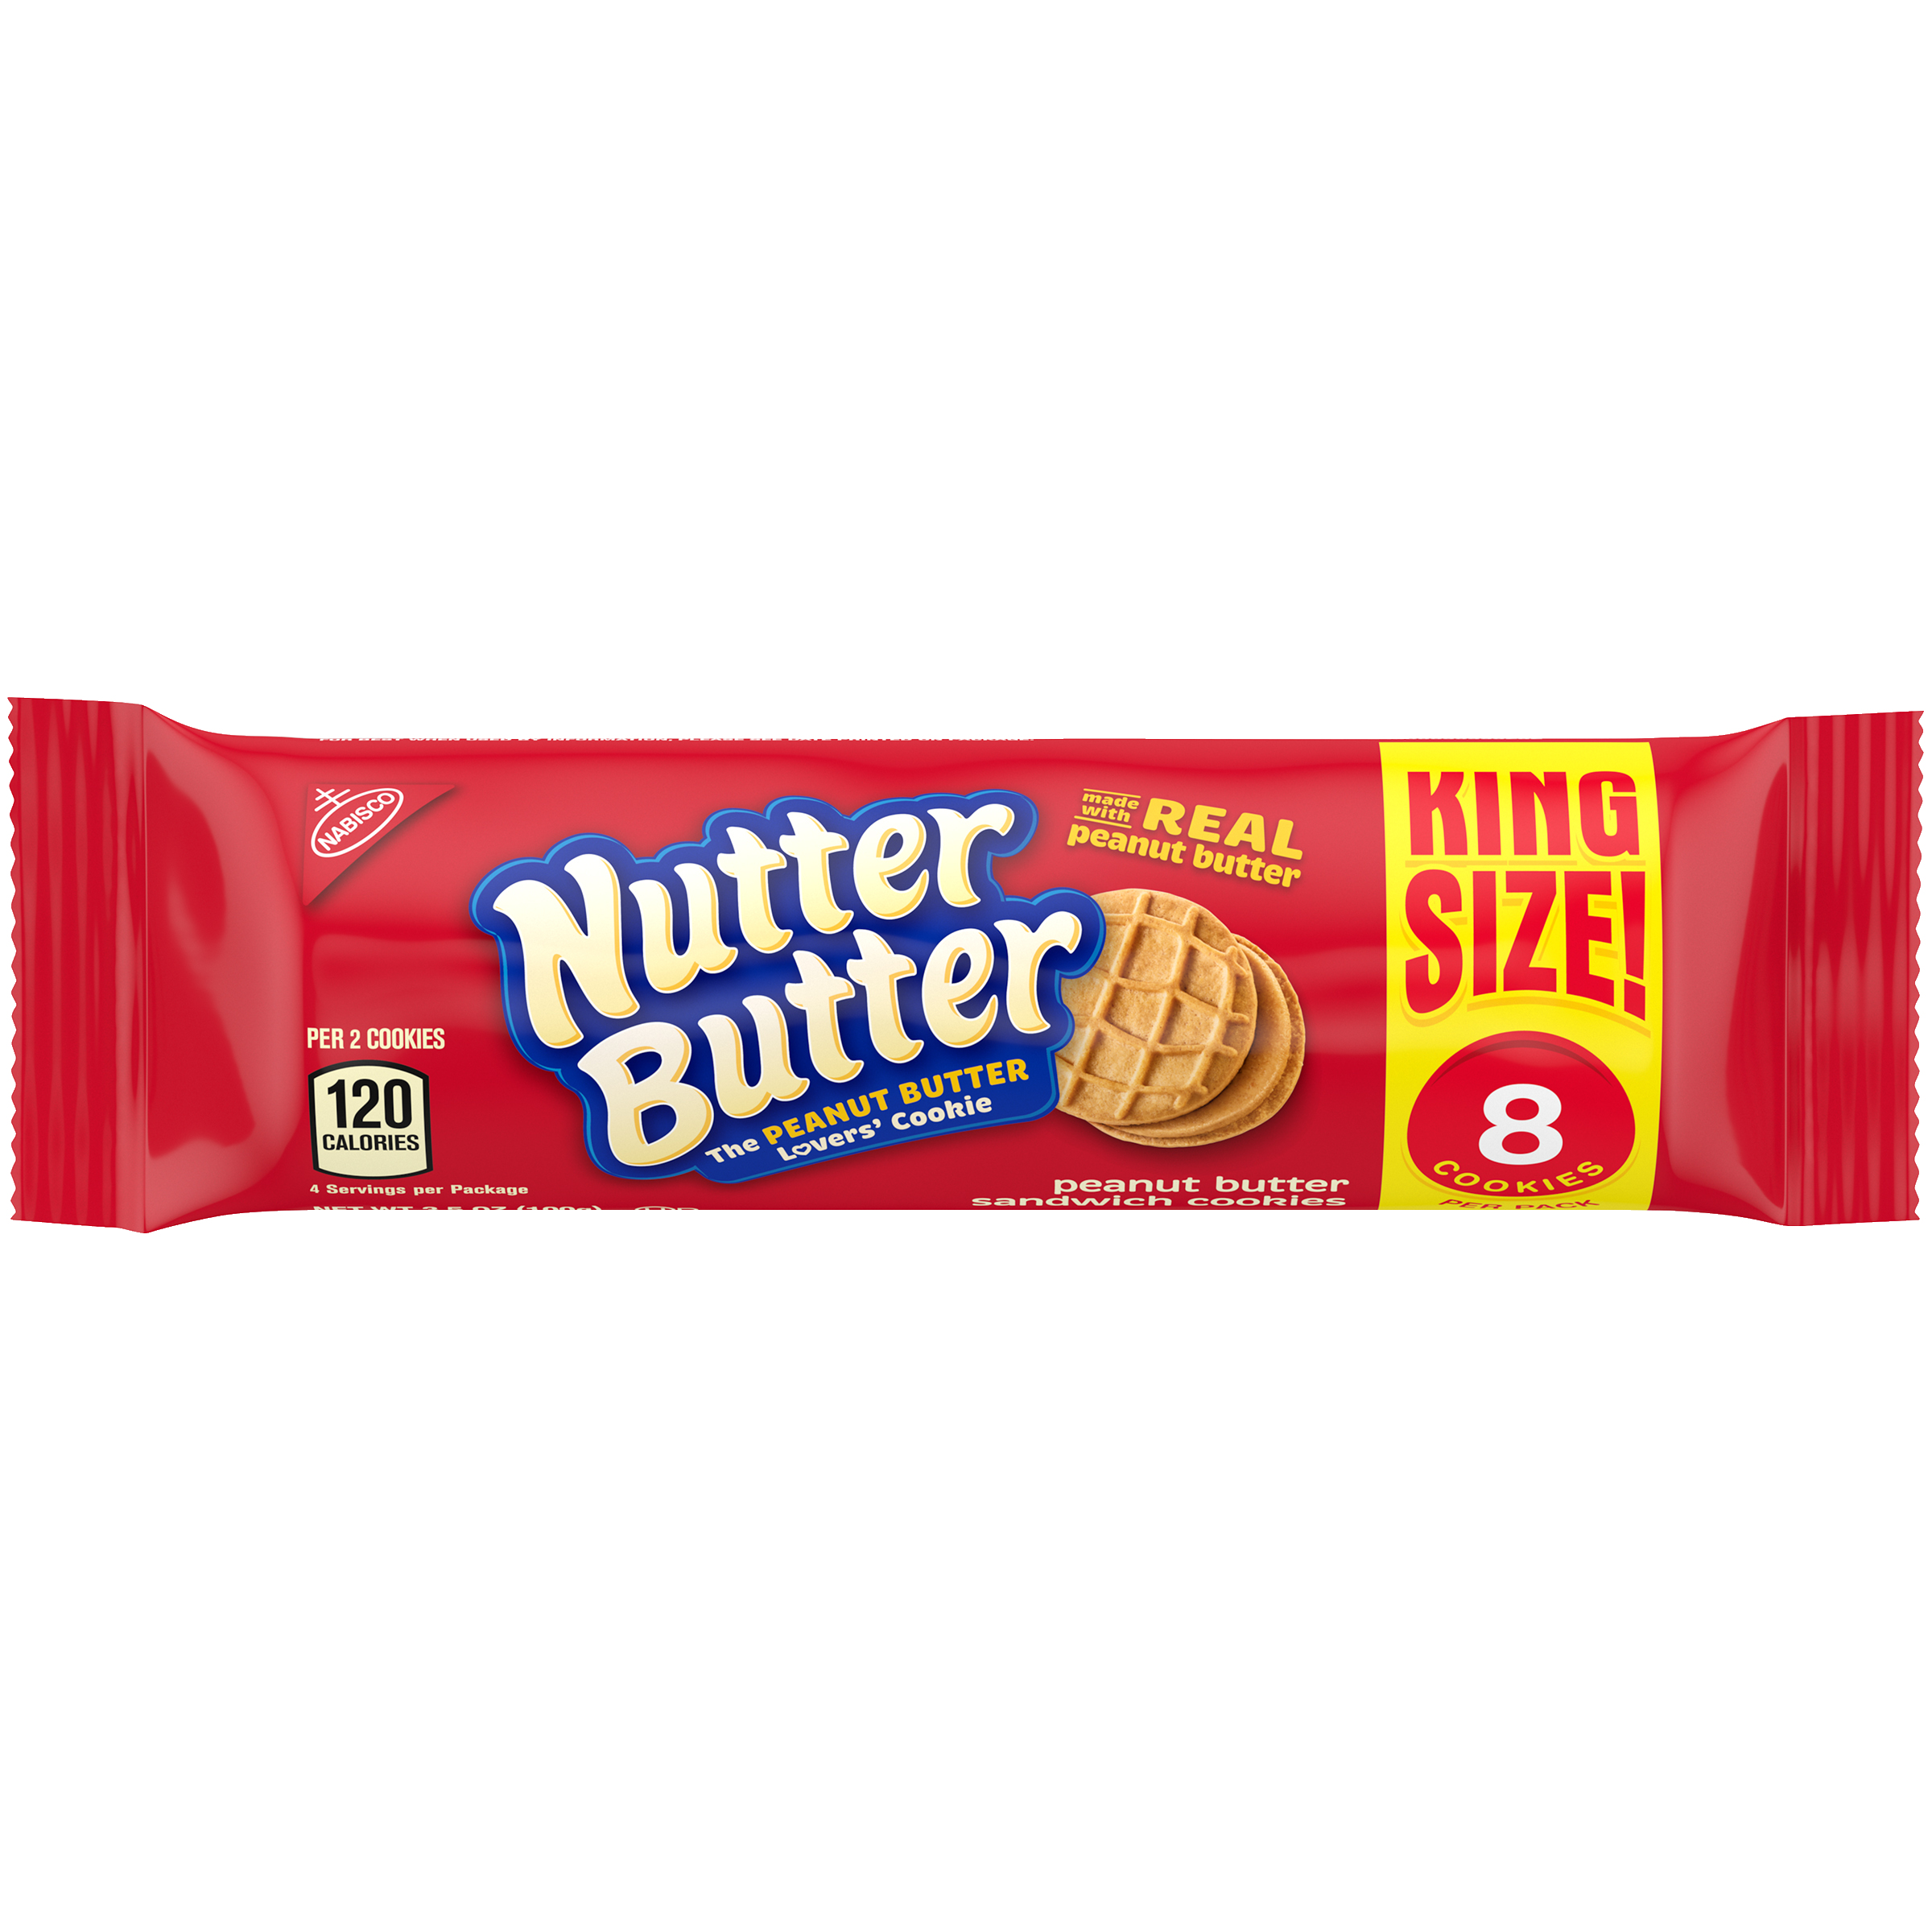 NUTTER BUTTER King Size 8CT 3.5OZ 2/10